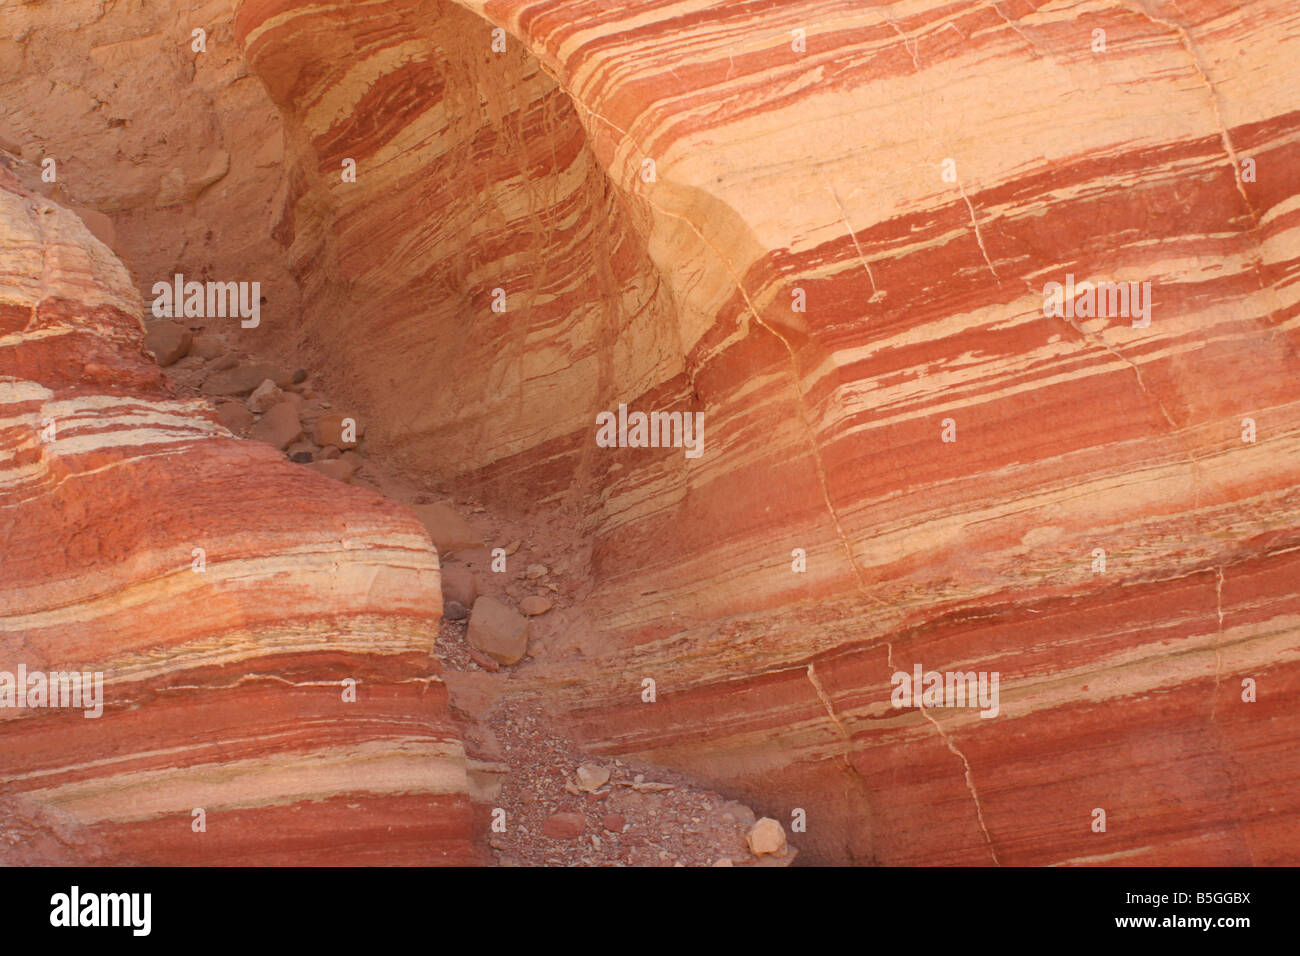 Israel Amir mountain Geology layers in the rock Stock Photo